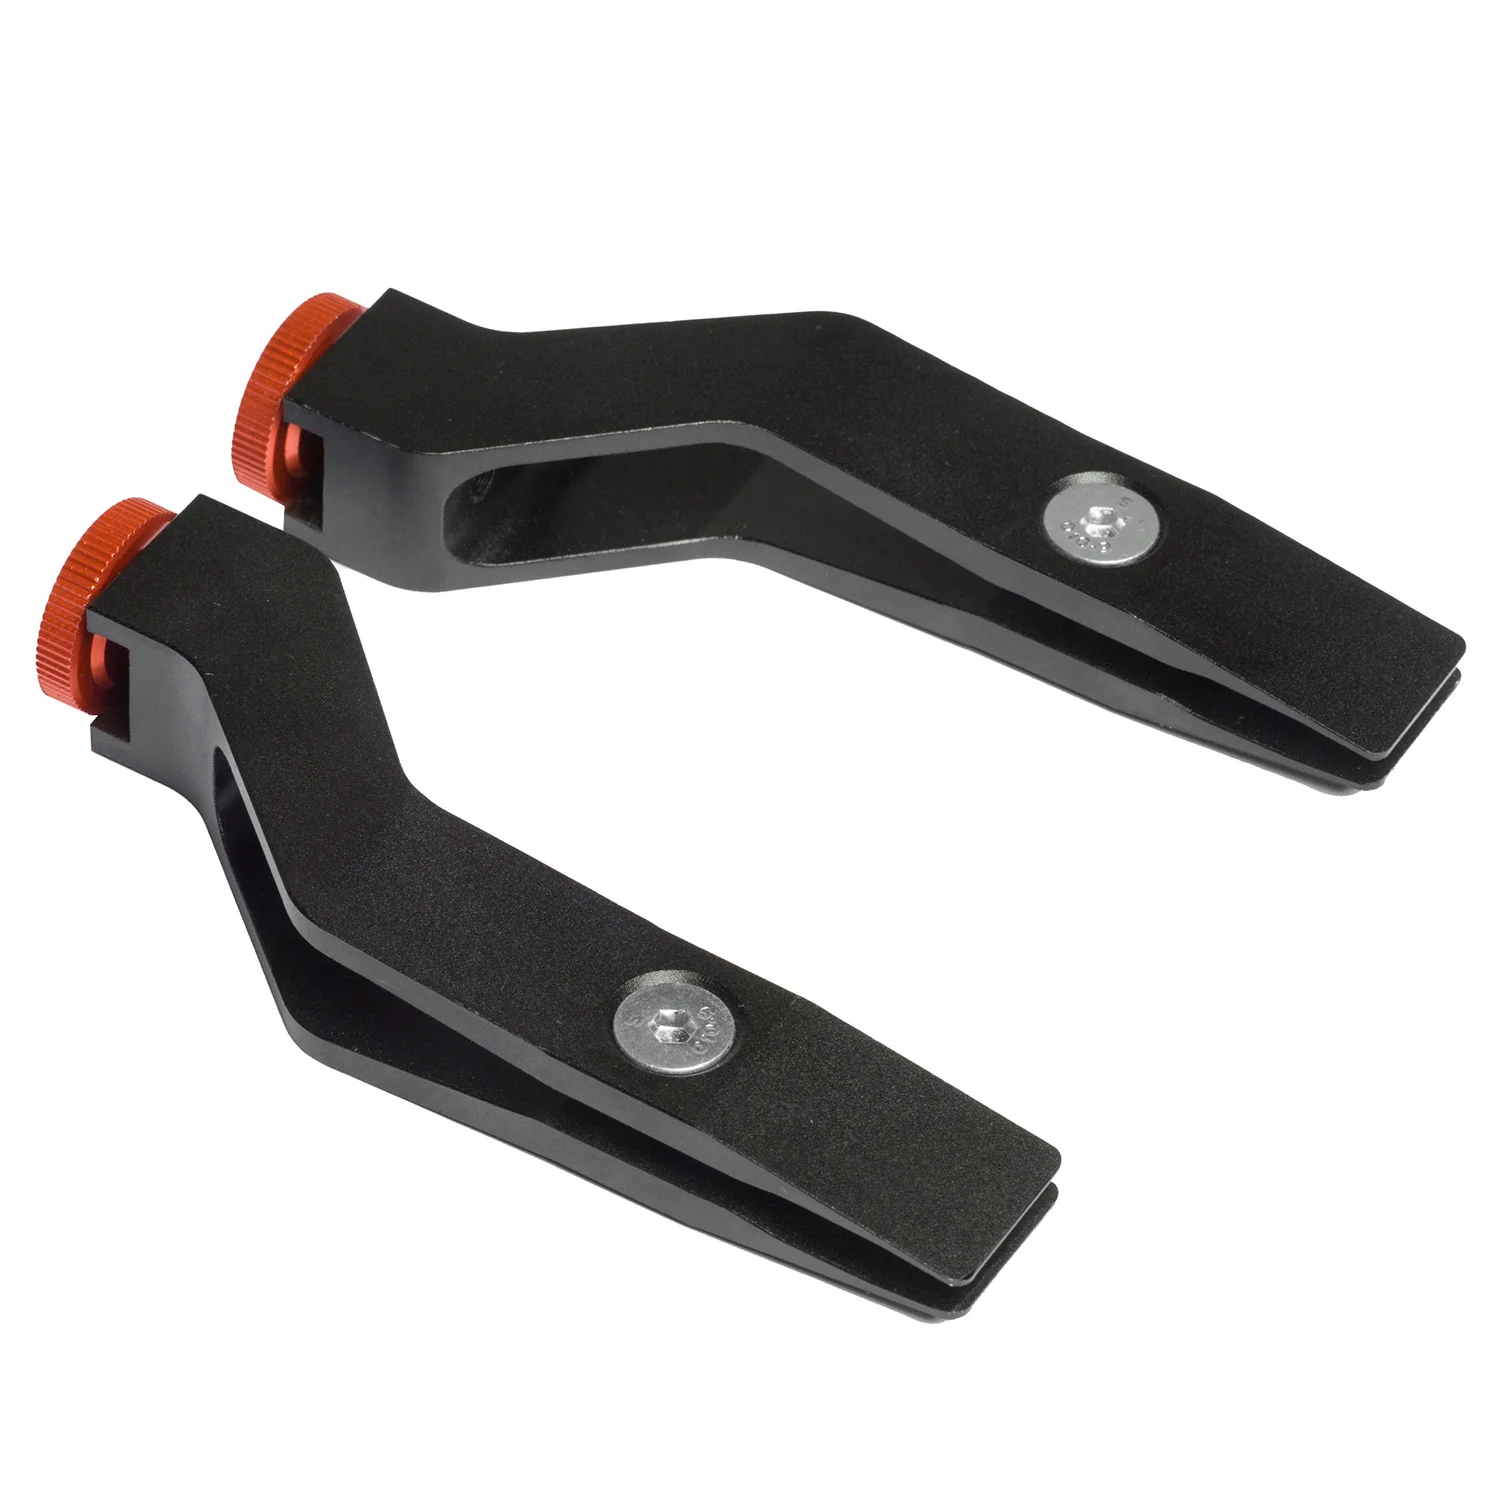 What is the difference between these and the clamps that come with the RS?